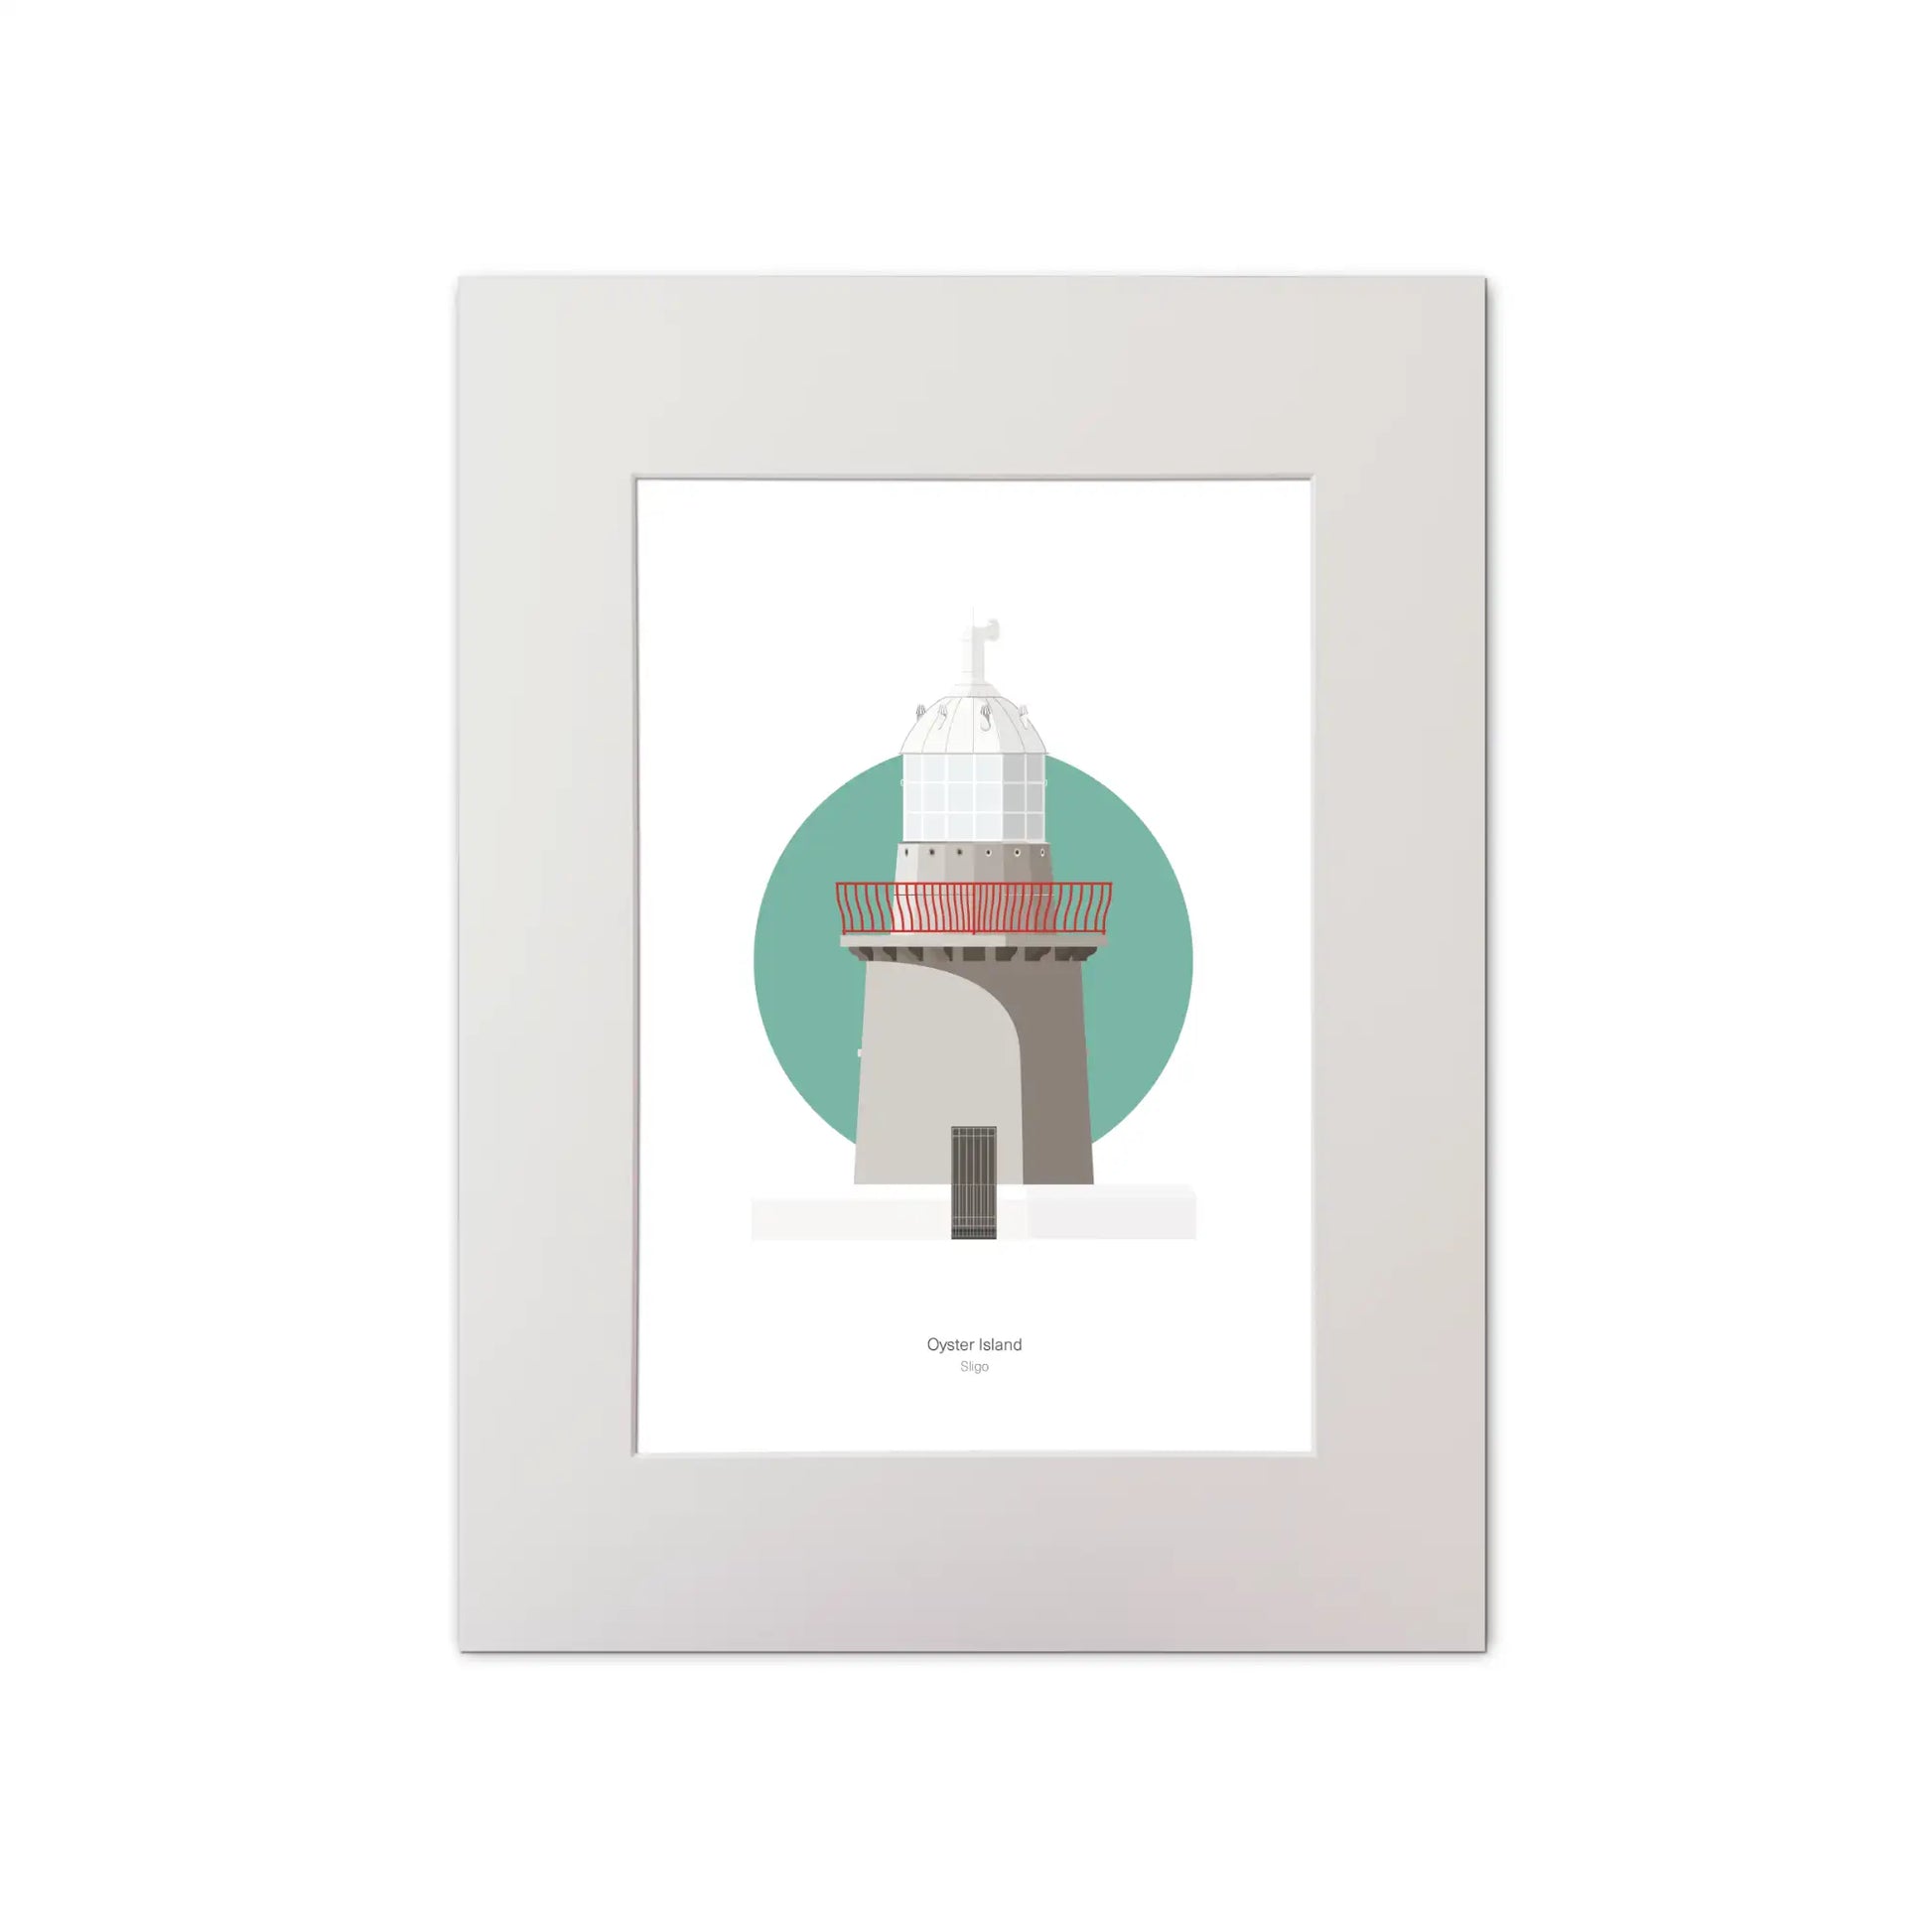 Illustration of Oyster Island lighthouse on a white background inside light blue square, mounted and measuring 30x40cm.